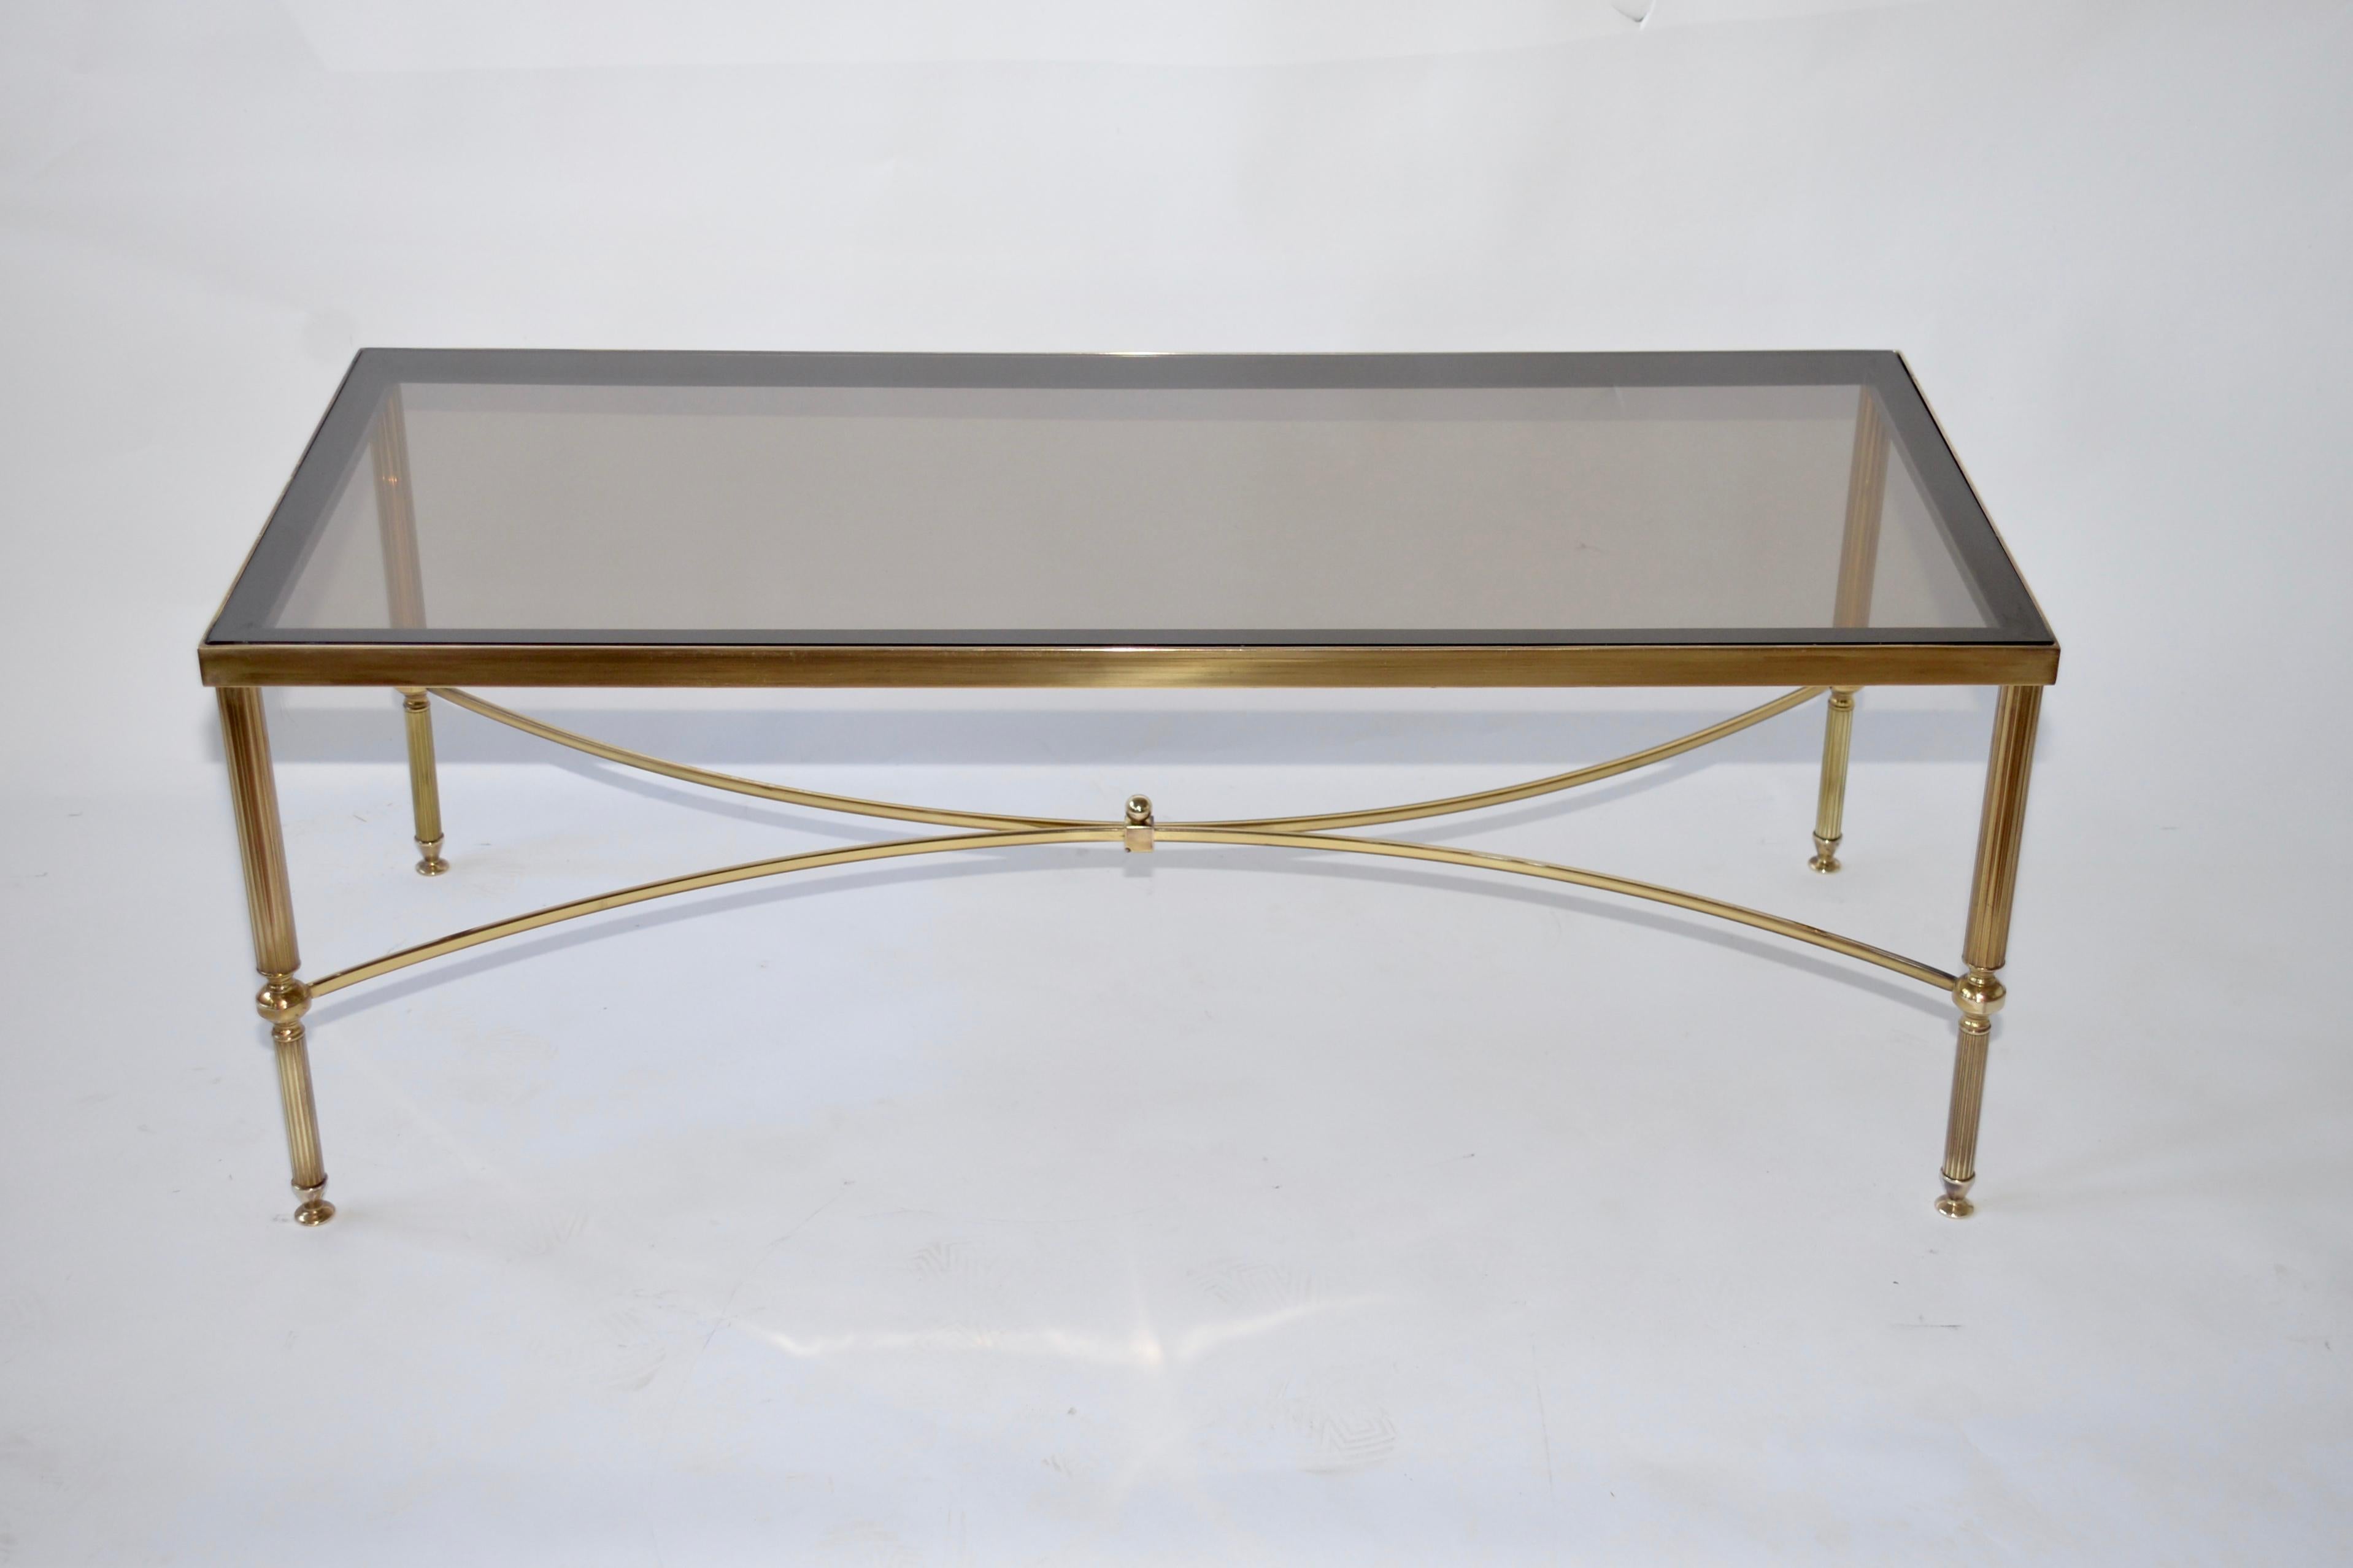 A Hollywood Regency style solid brass coffee table. Original smoked glass top with a border around the edge of the glass. Lovely original item.
          